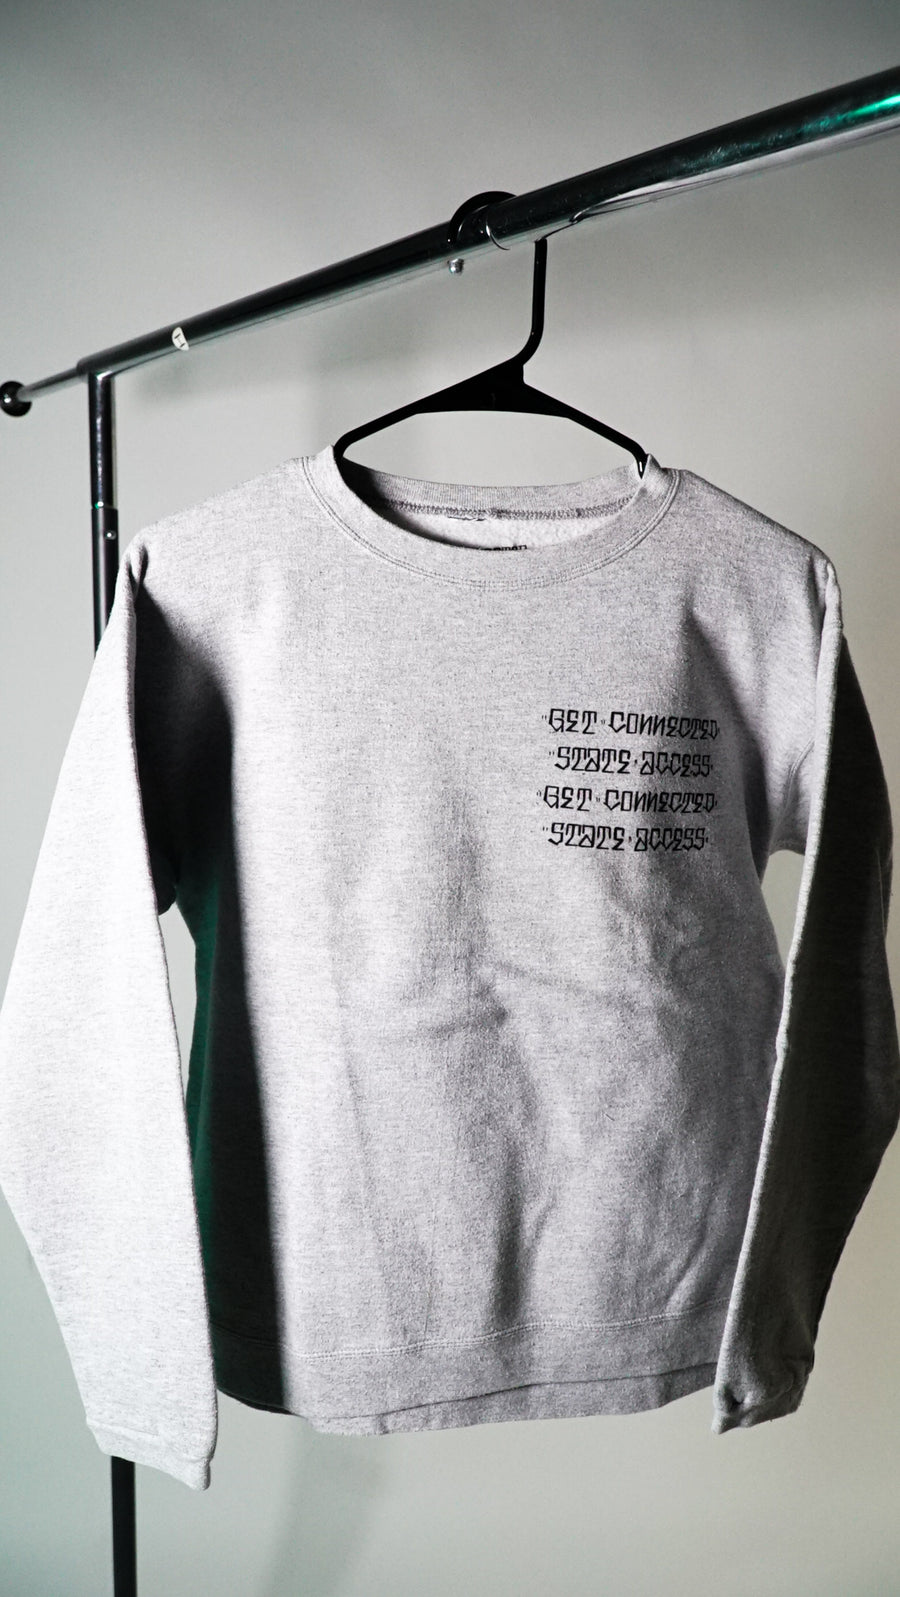 Get Connected State Access Crewneck